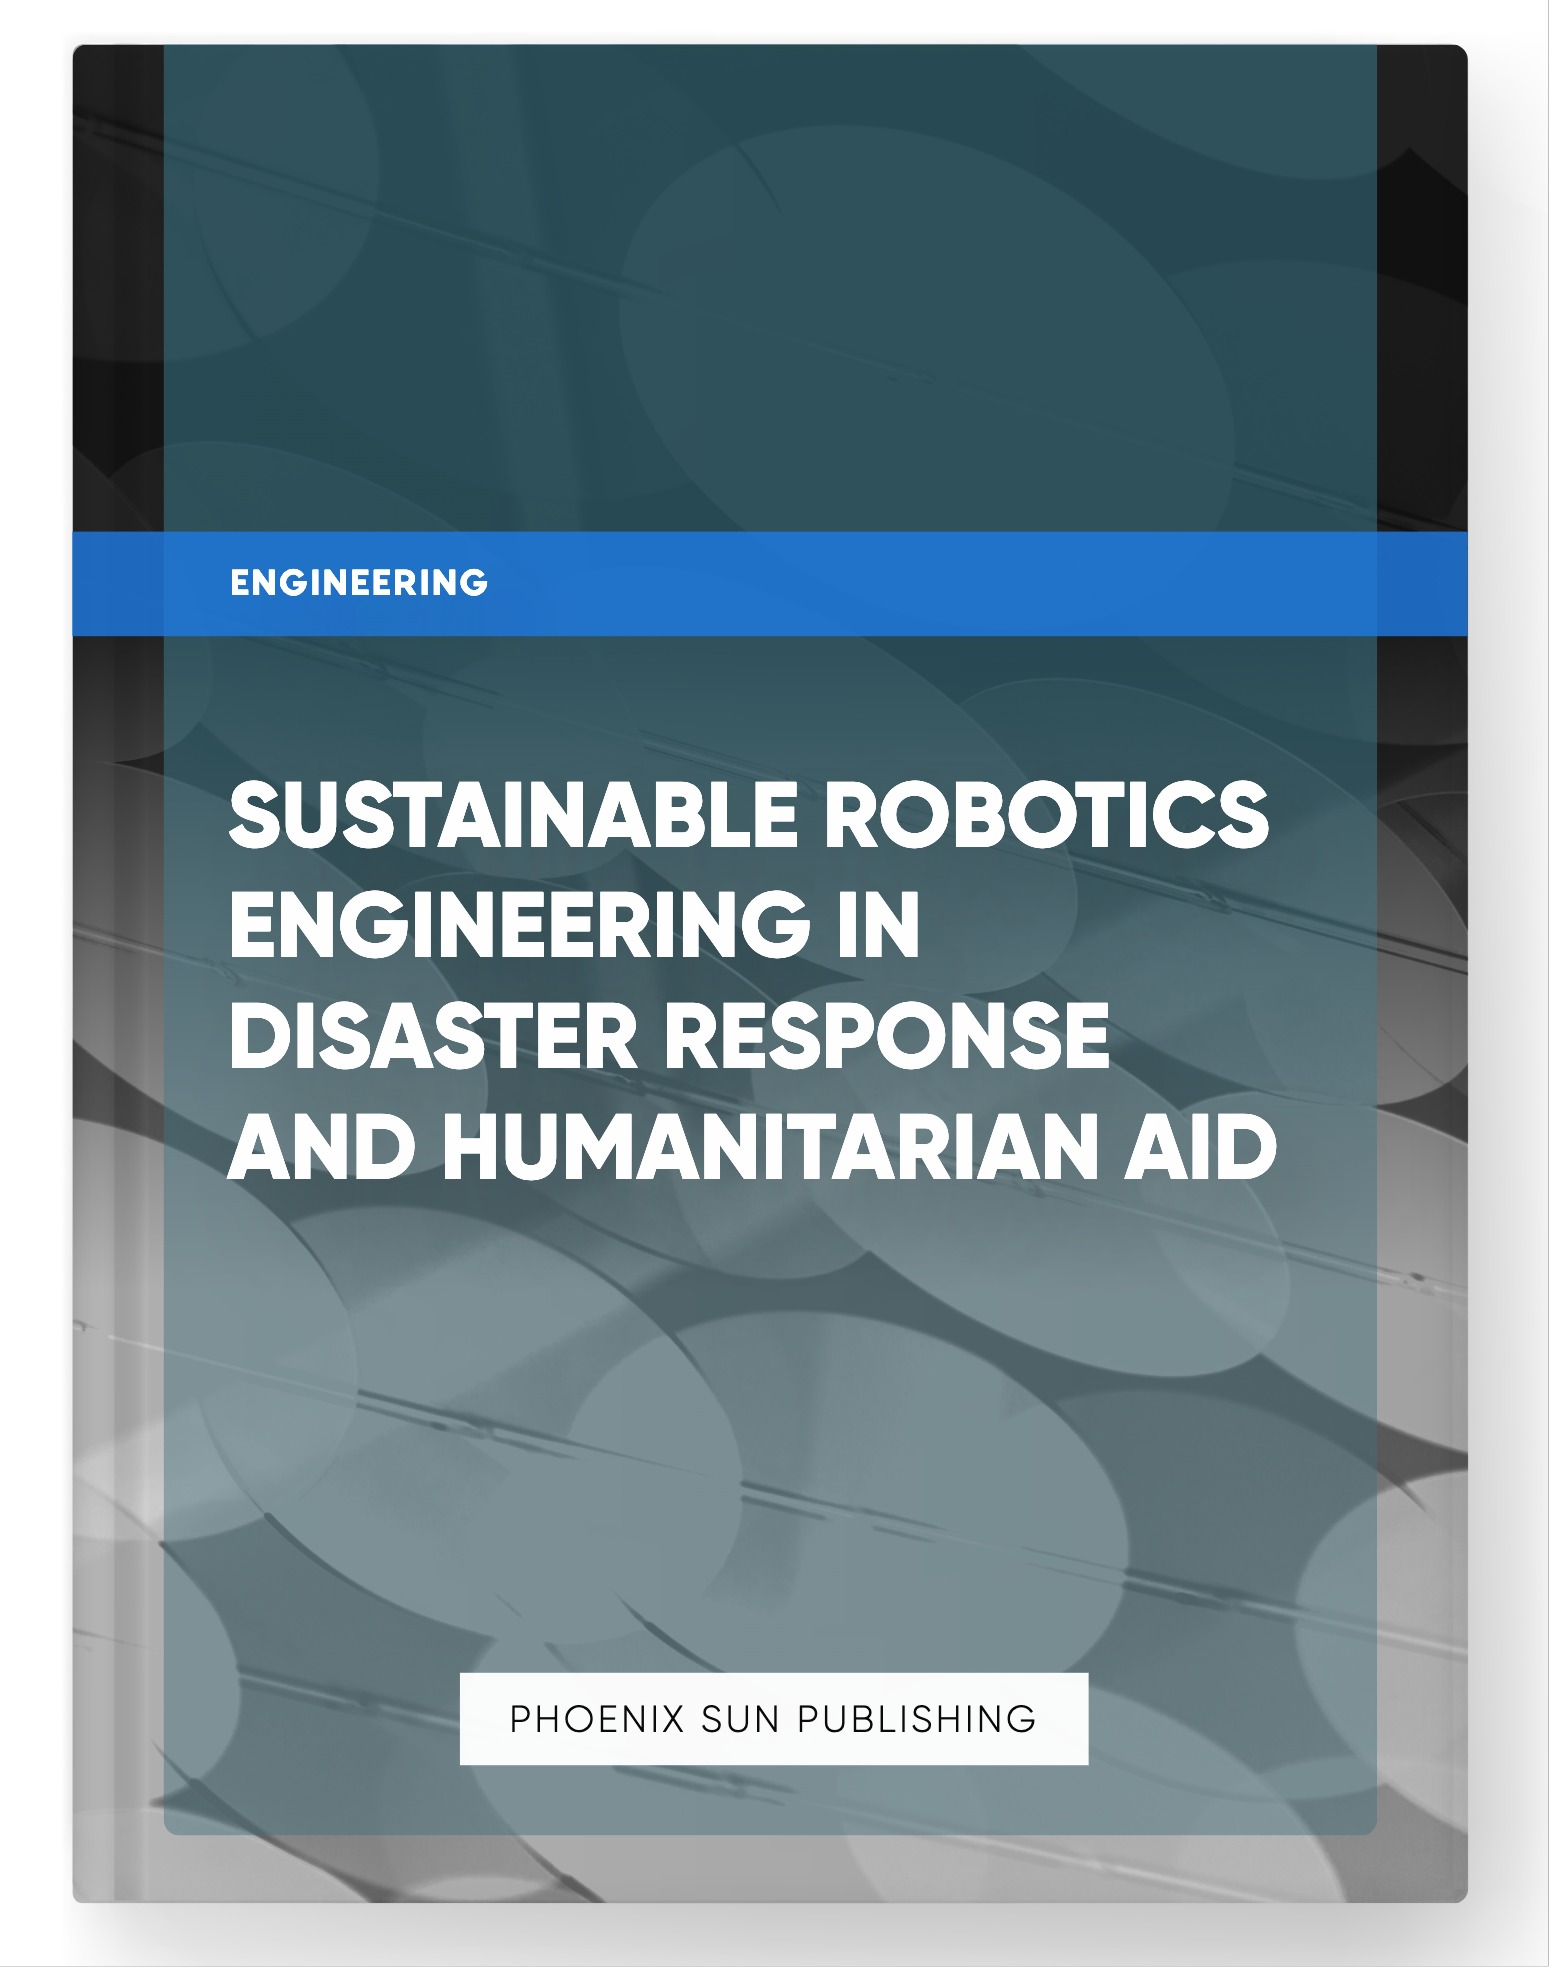 Sustainable Robotics Engineering in Disaster Response and Humanitarian Aid